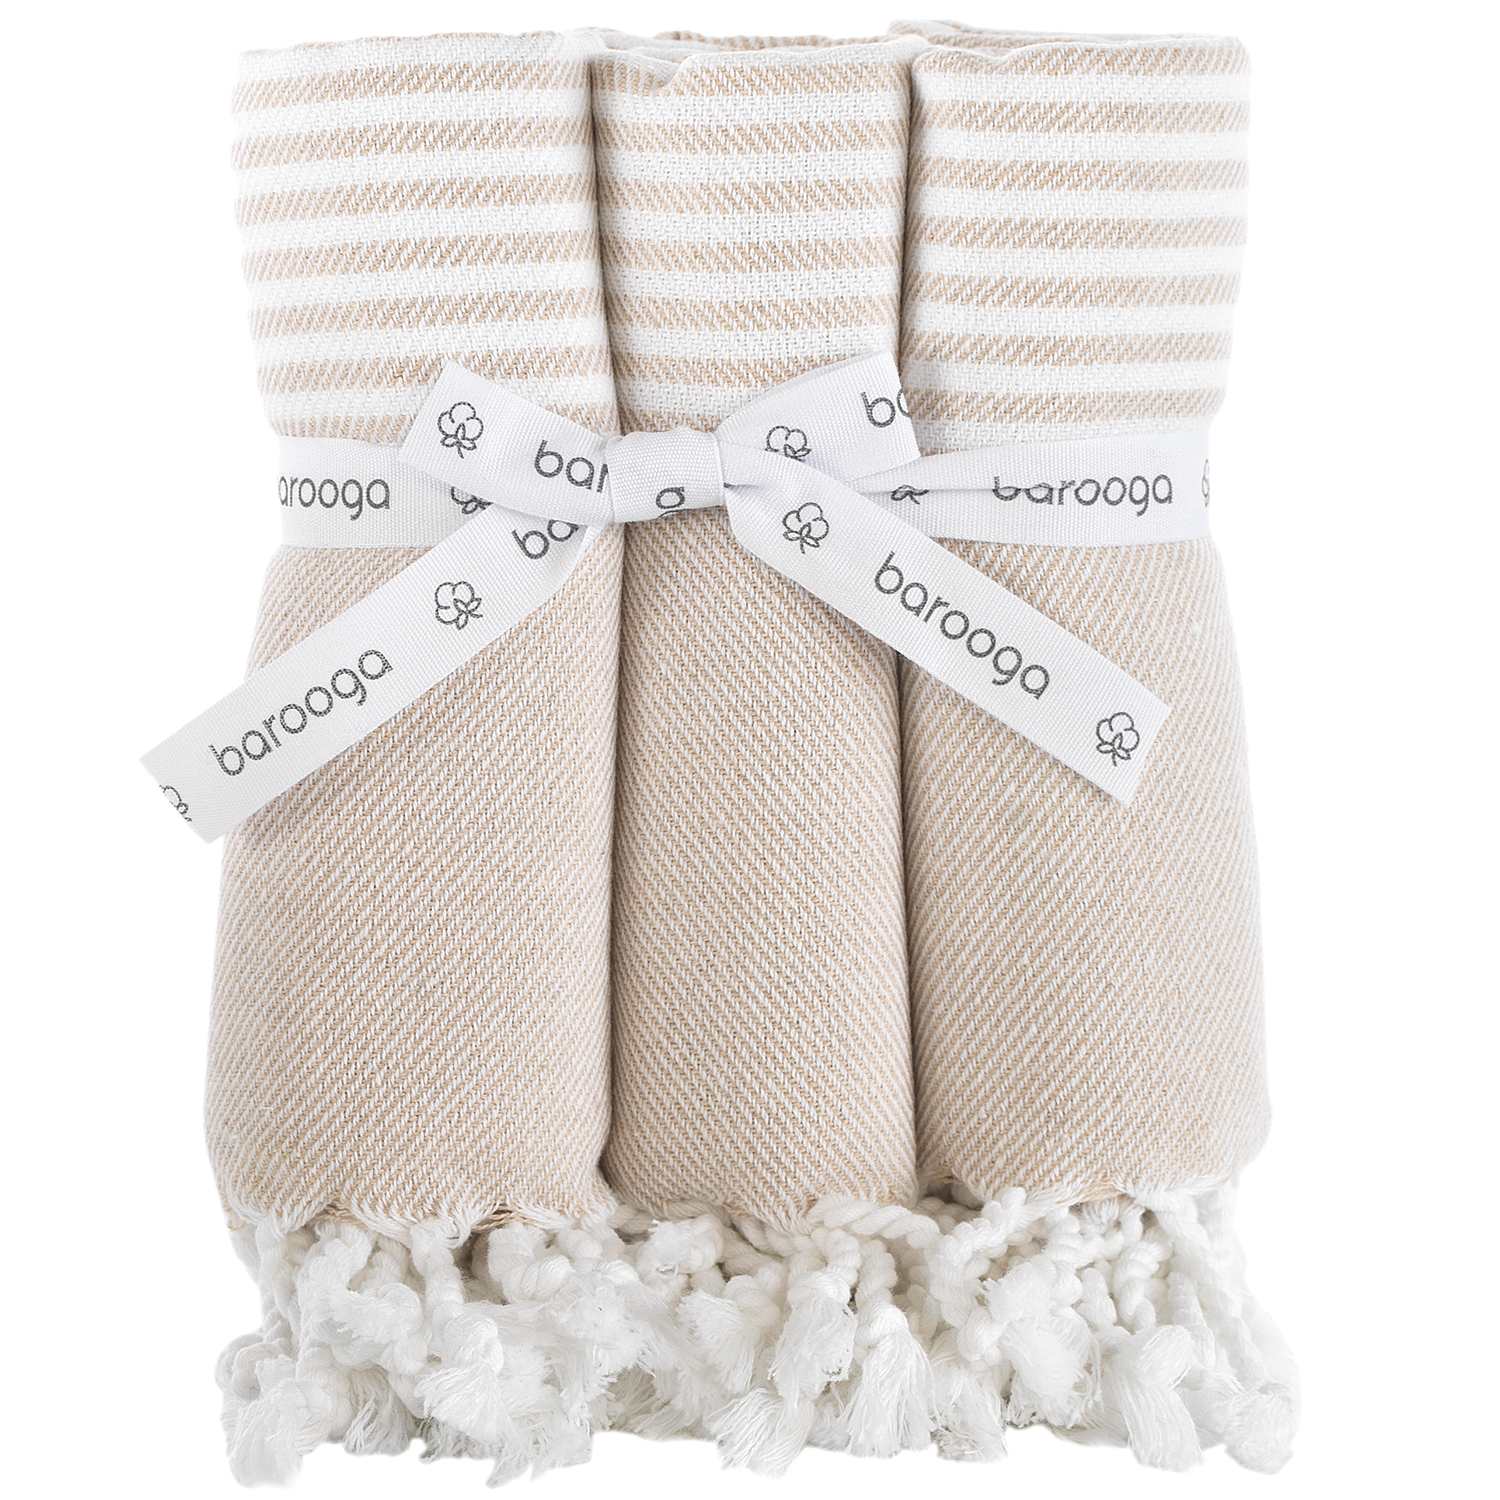 Turkish Hand Towels for Bathroom and Kitchen, 18 x 38 Inches, (Set of 3), Beige - image 1 of 6